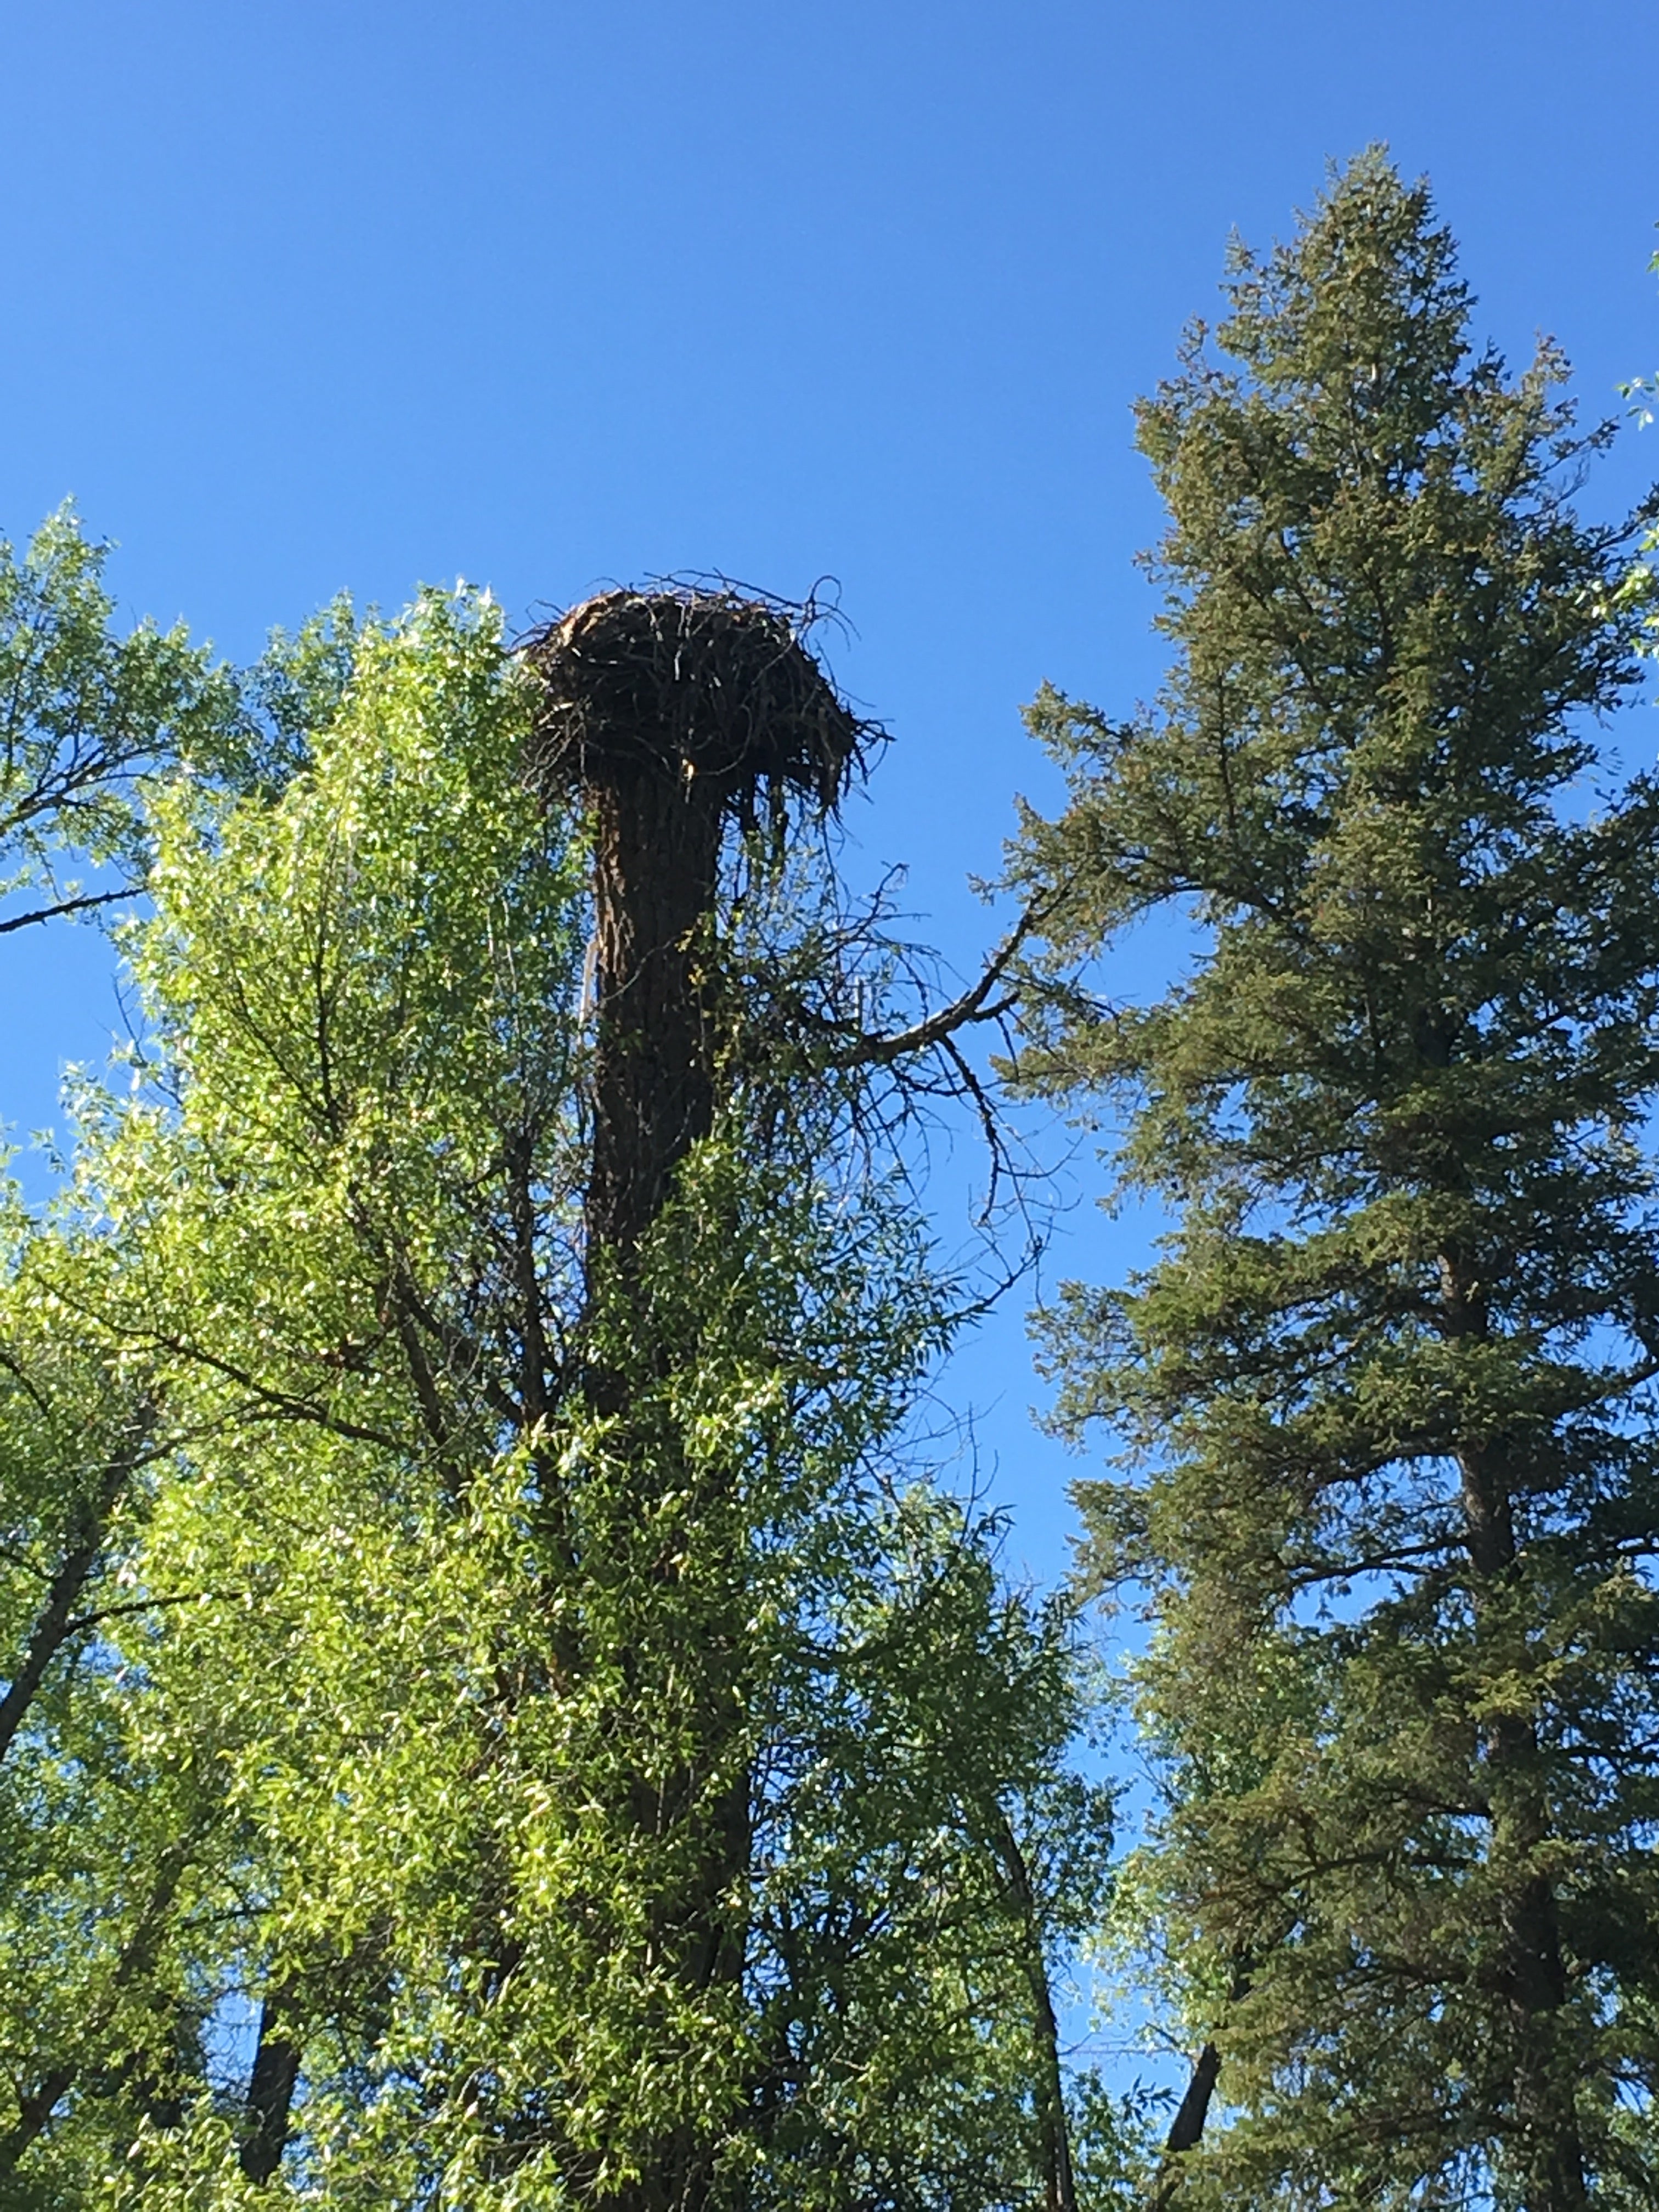 Cool osprey (?) nest not far from the campground. The raptor flew over me several times while I hiked, maybe chicks in the nest?